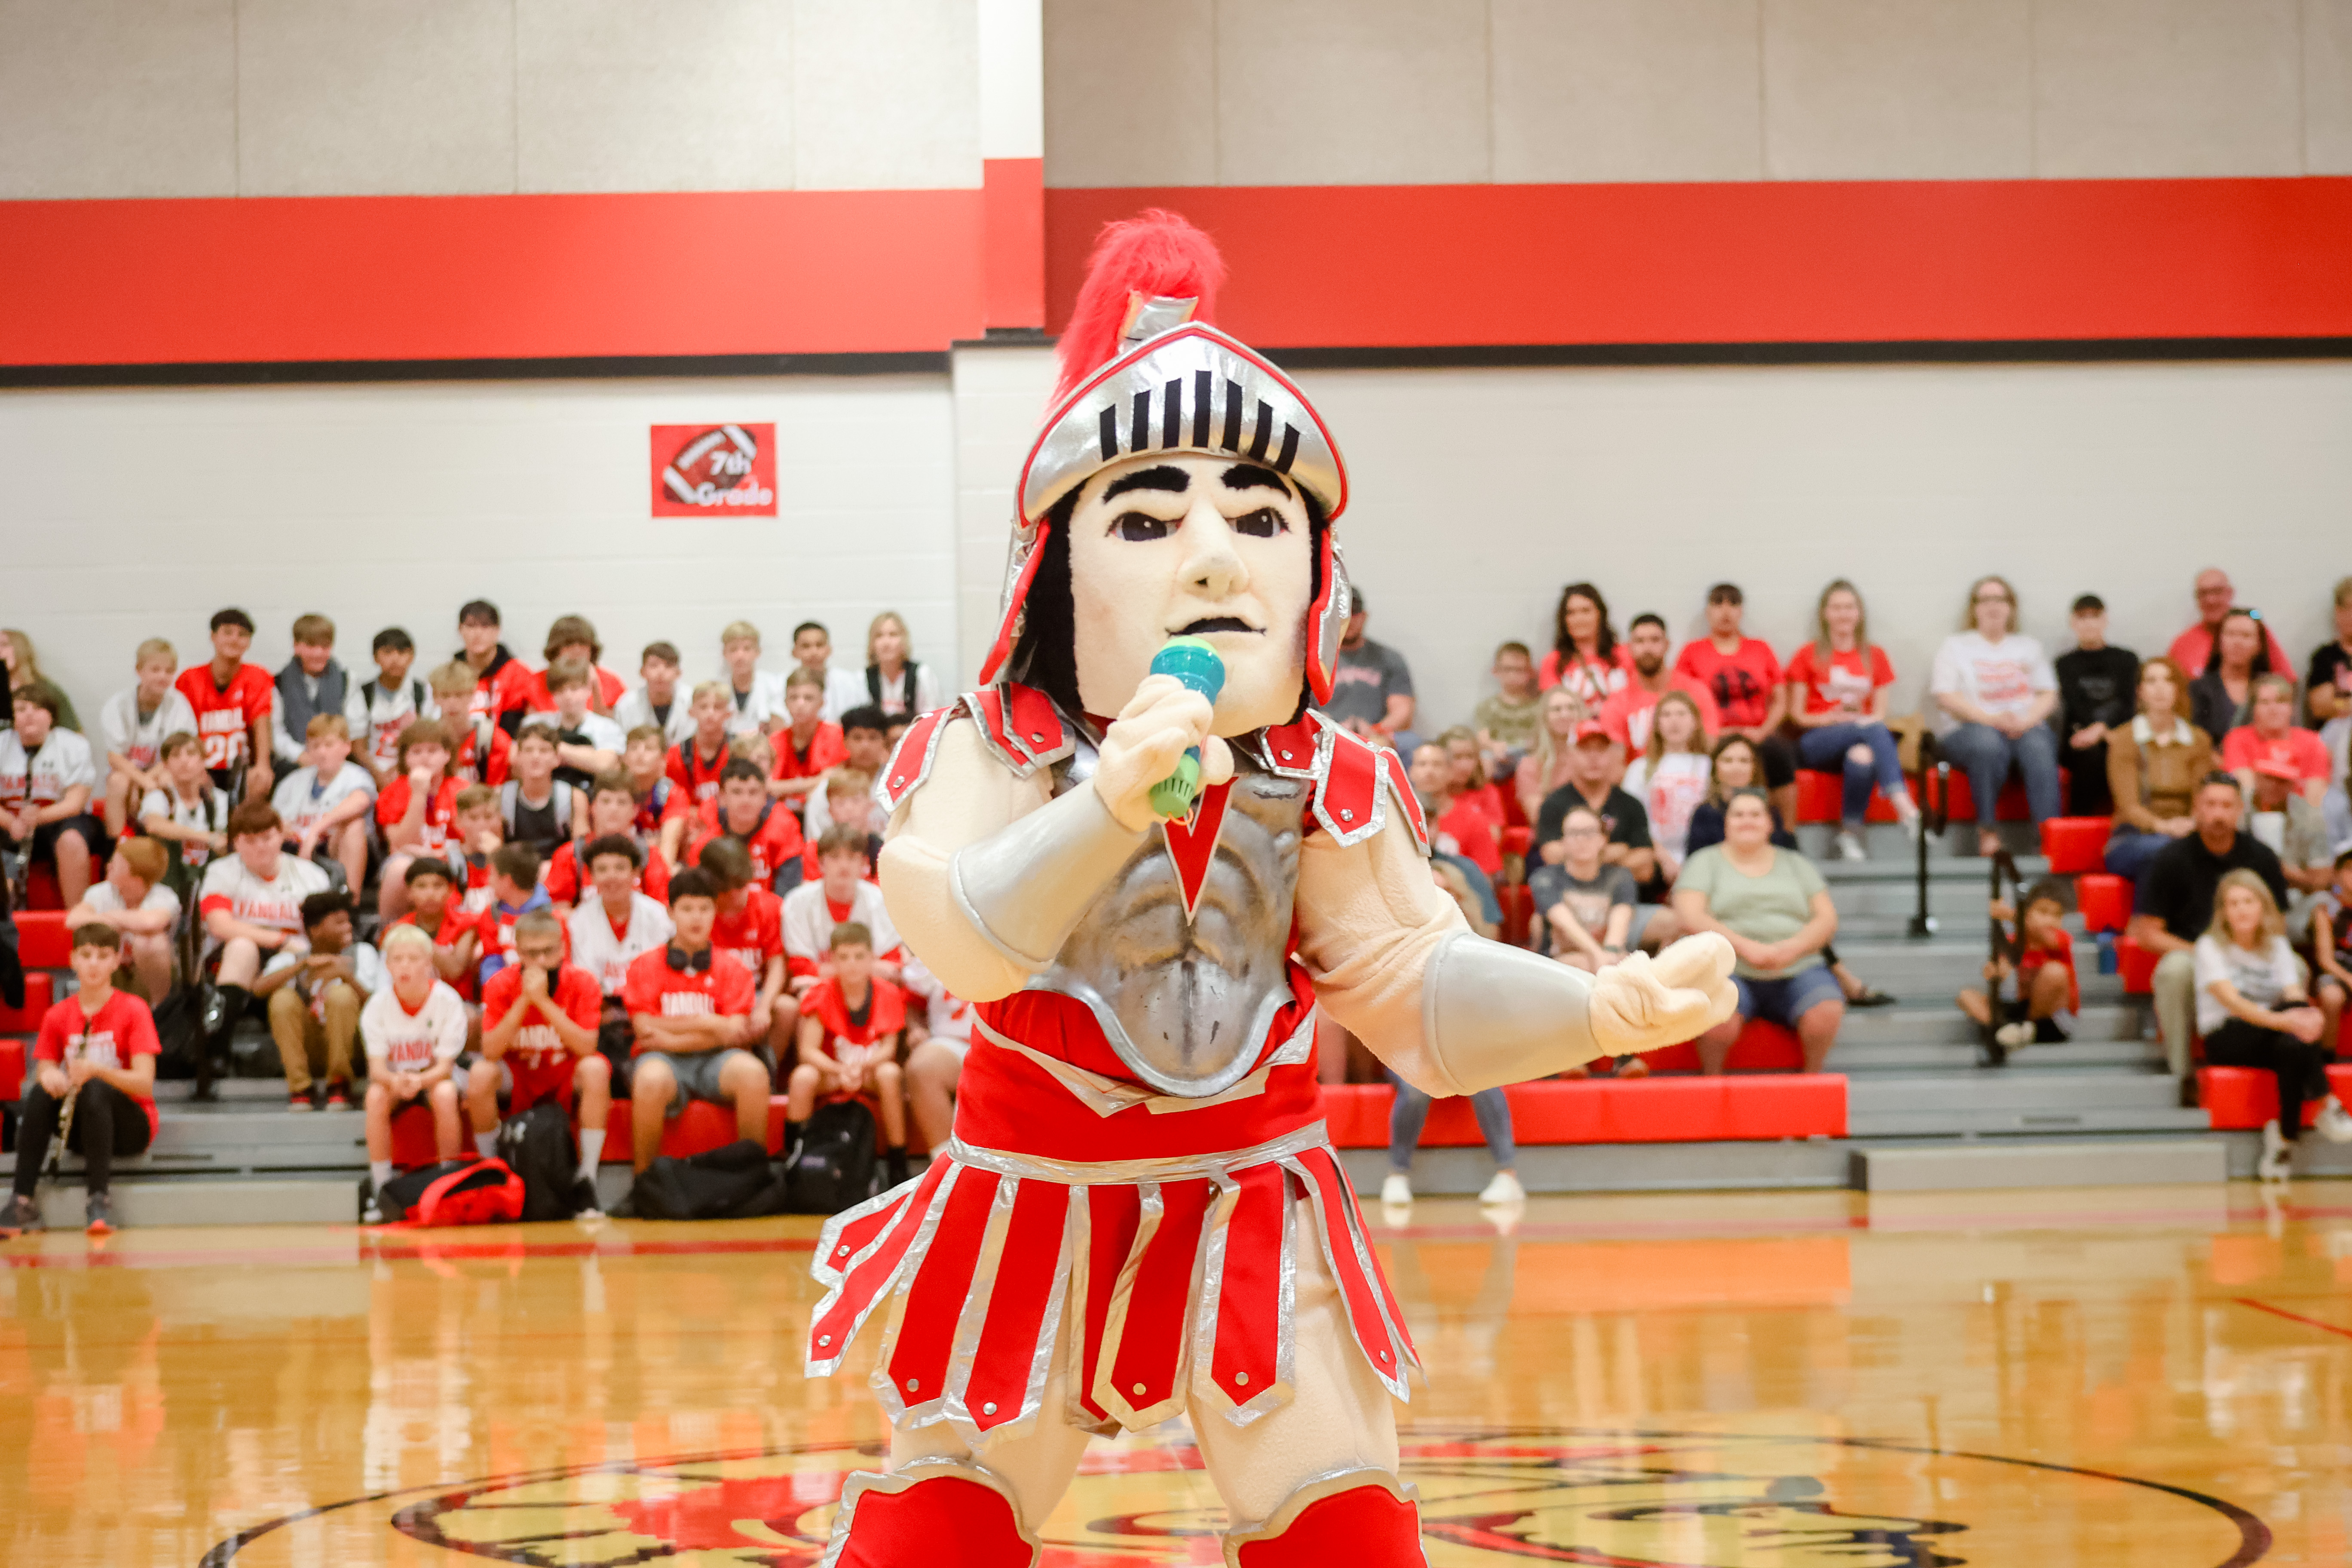 mascot sings into microphone in front of the crowd at a pep rally